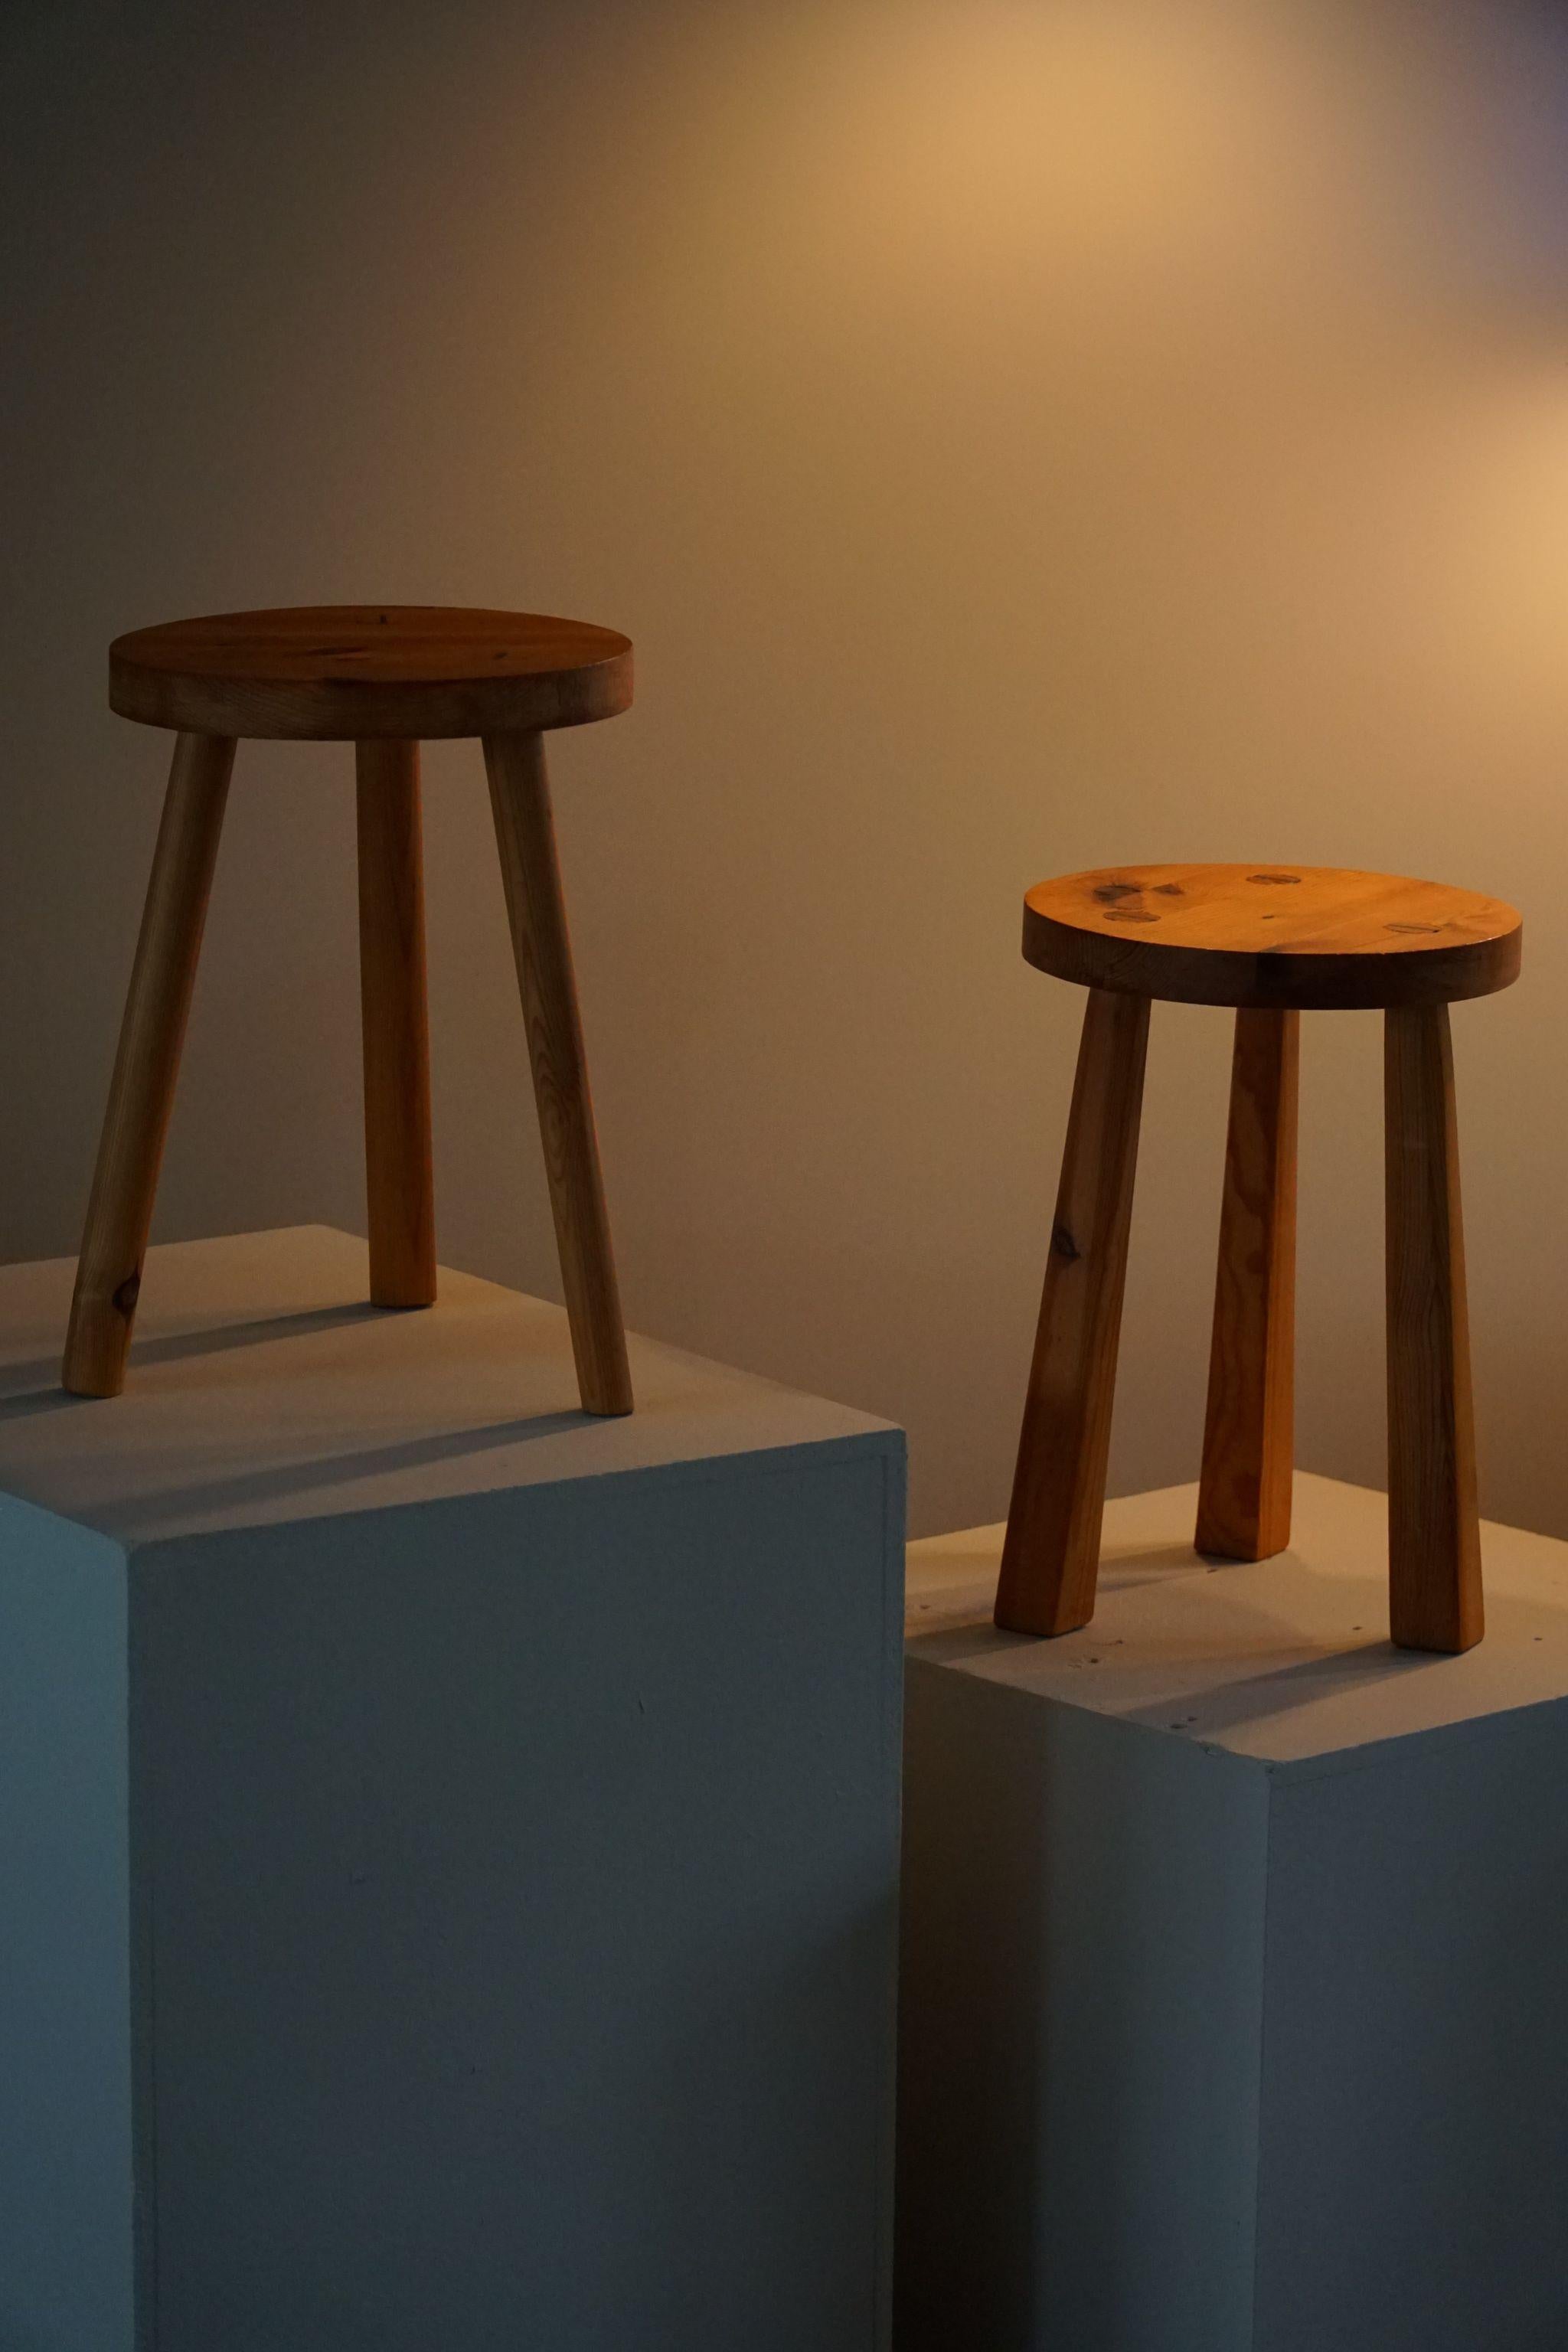 Pair of Tripod Stools in Pine, by Swedish Cabinetmaker, Mid Century, Ca 1960s For Sale 7